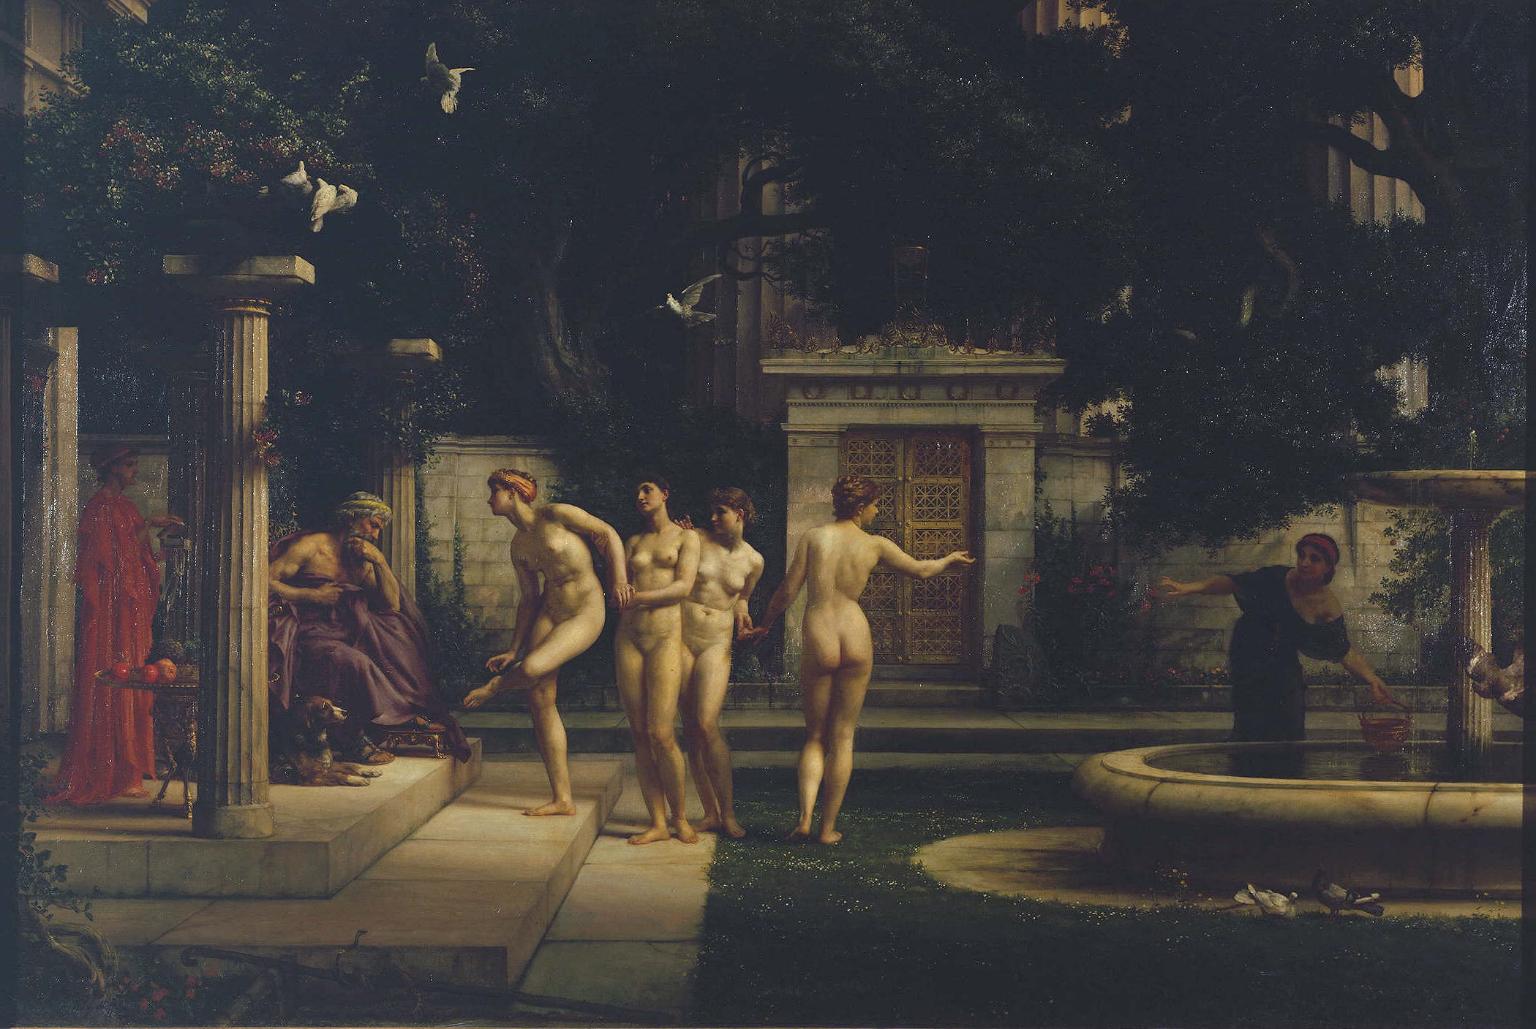 A Visit to Aesculapius 1880 Sir Edward Poynter 1836-1919 Presented by the Trustees of the Chantrey Bequest 1880 http://www.tate.org.uk/art/work/N01586